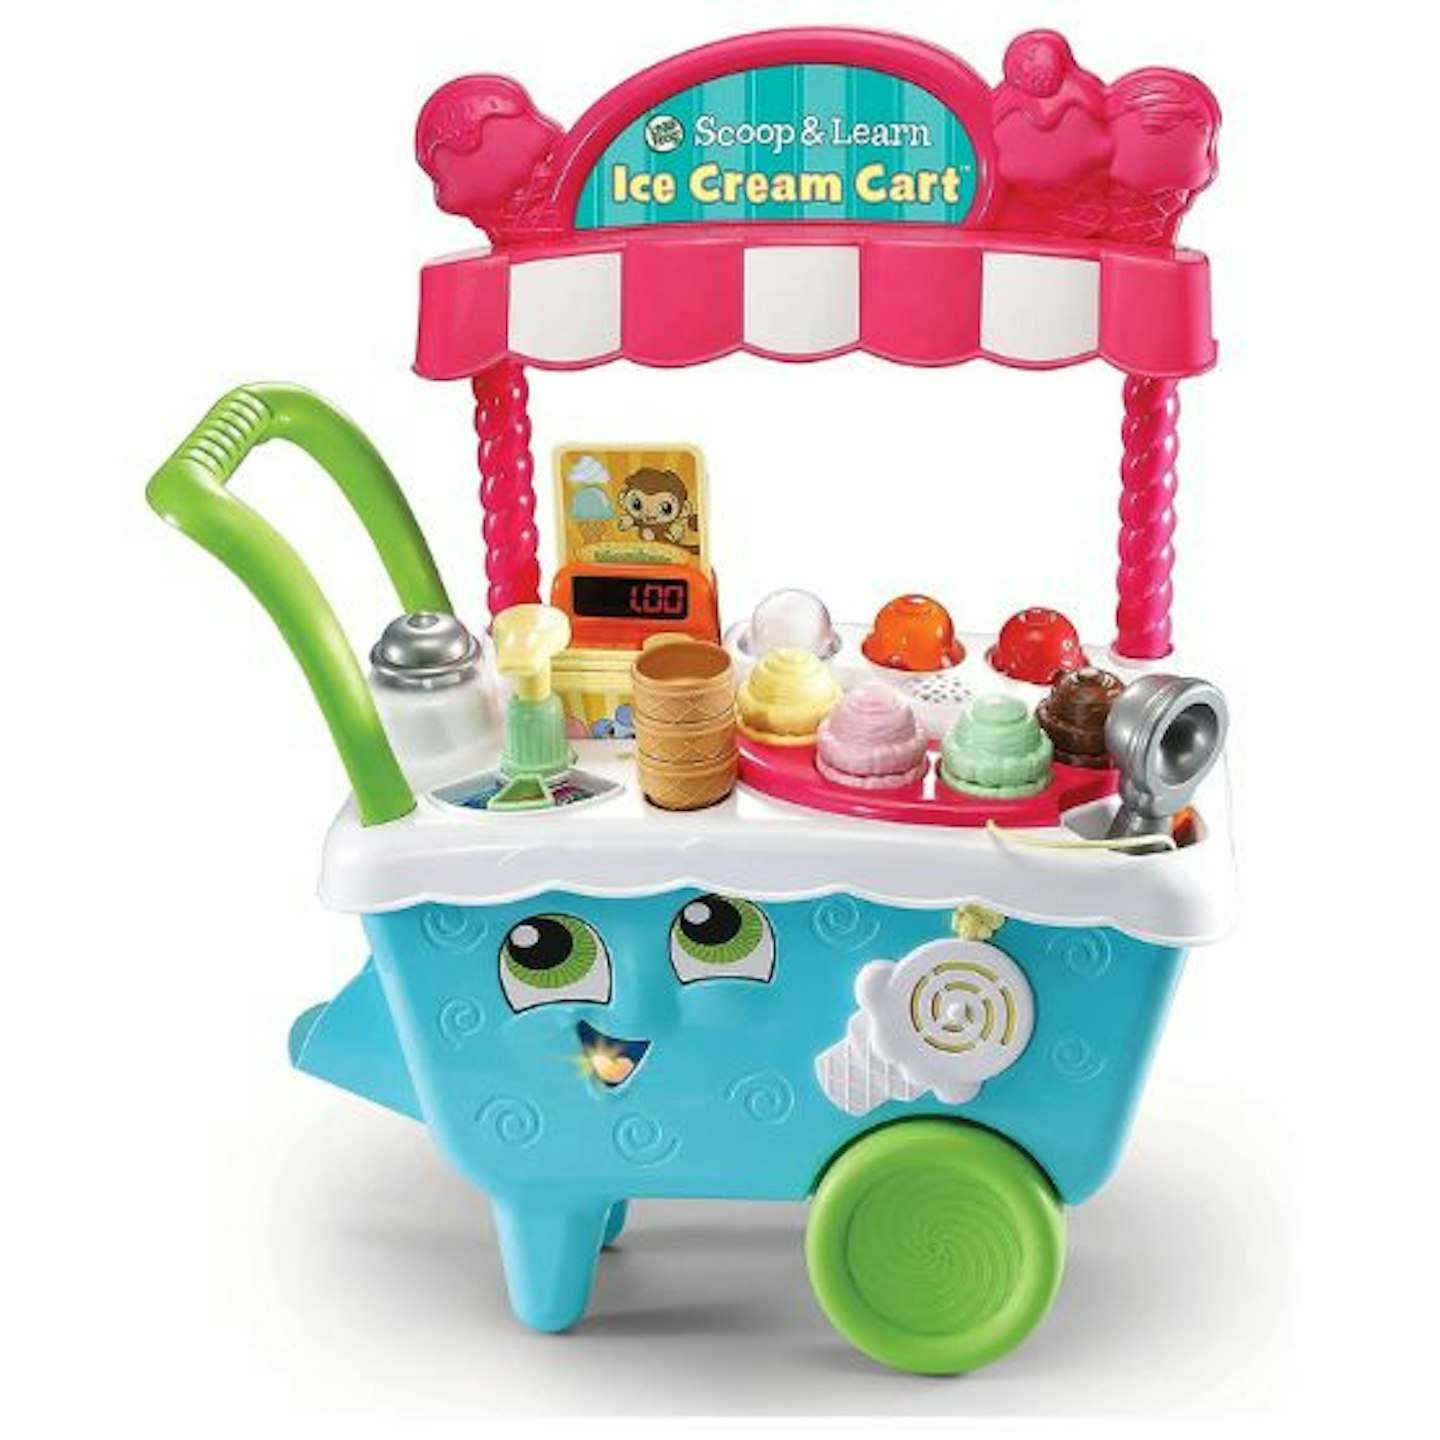 Vtech Scoop and Learn Ice Cream cart